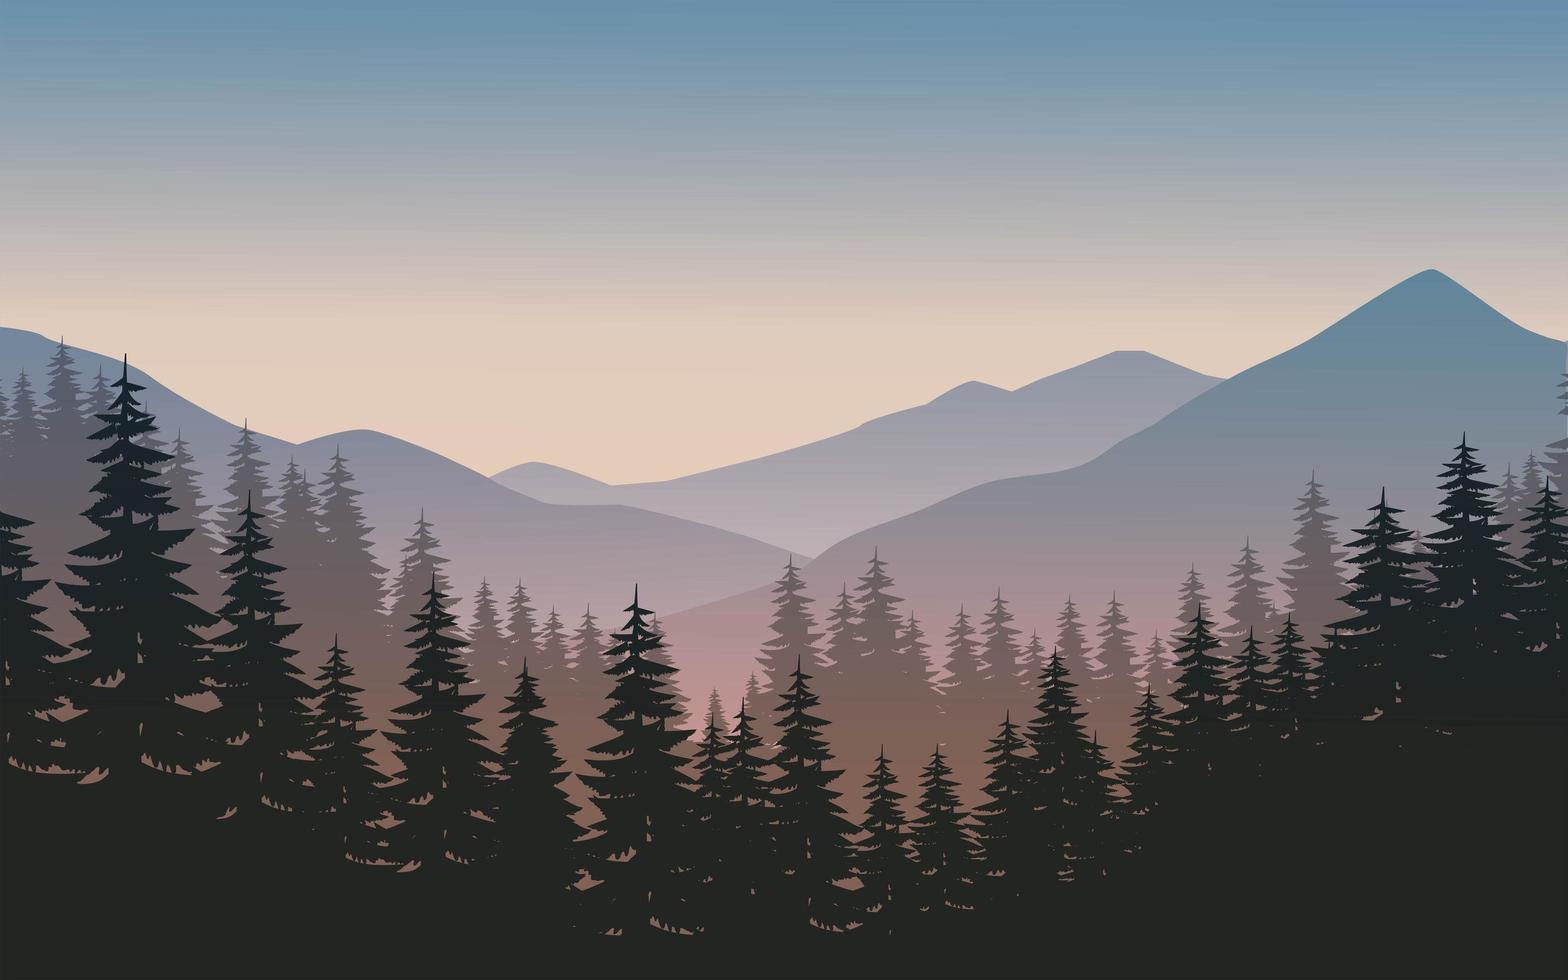 Foggy Mountain and Pine Forest Silhouette vector